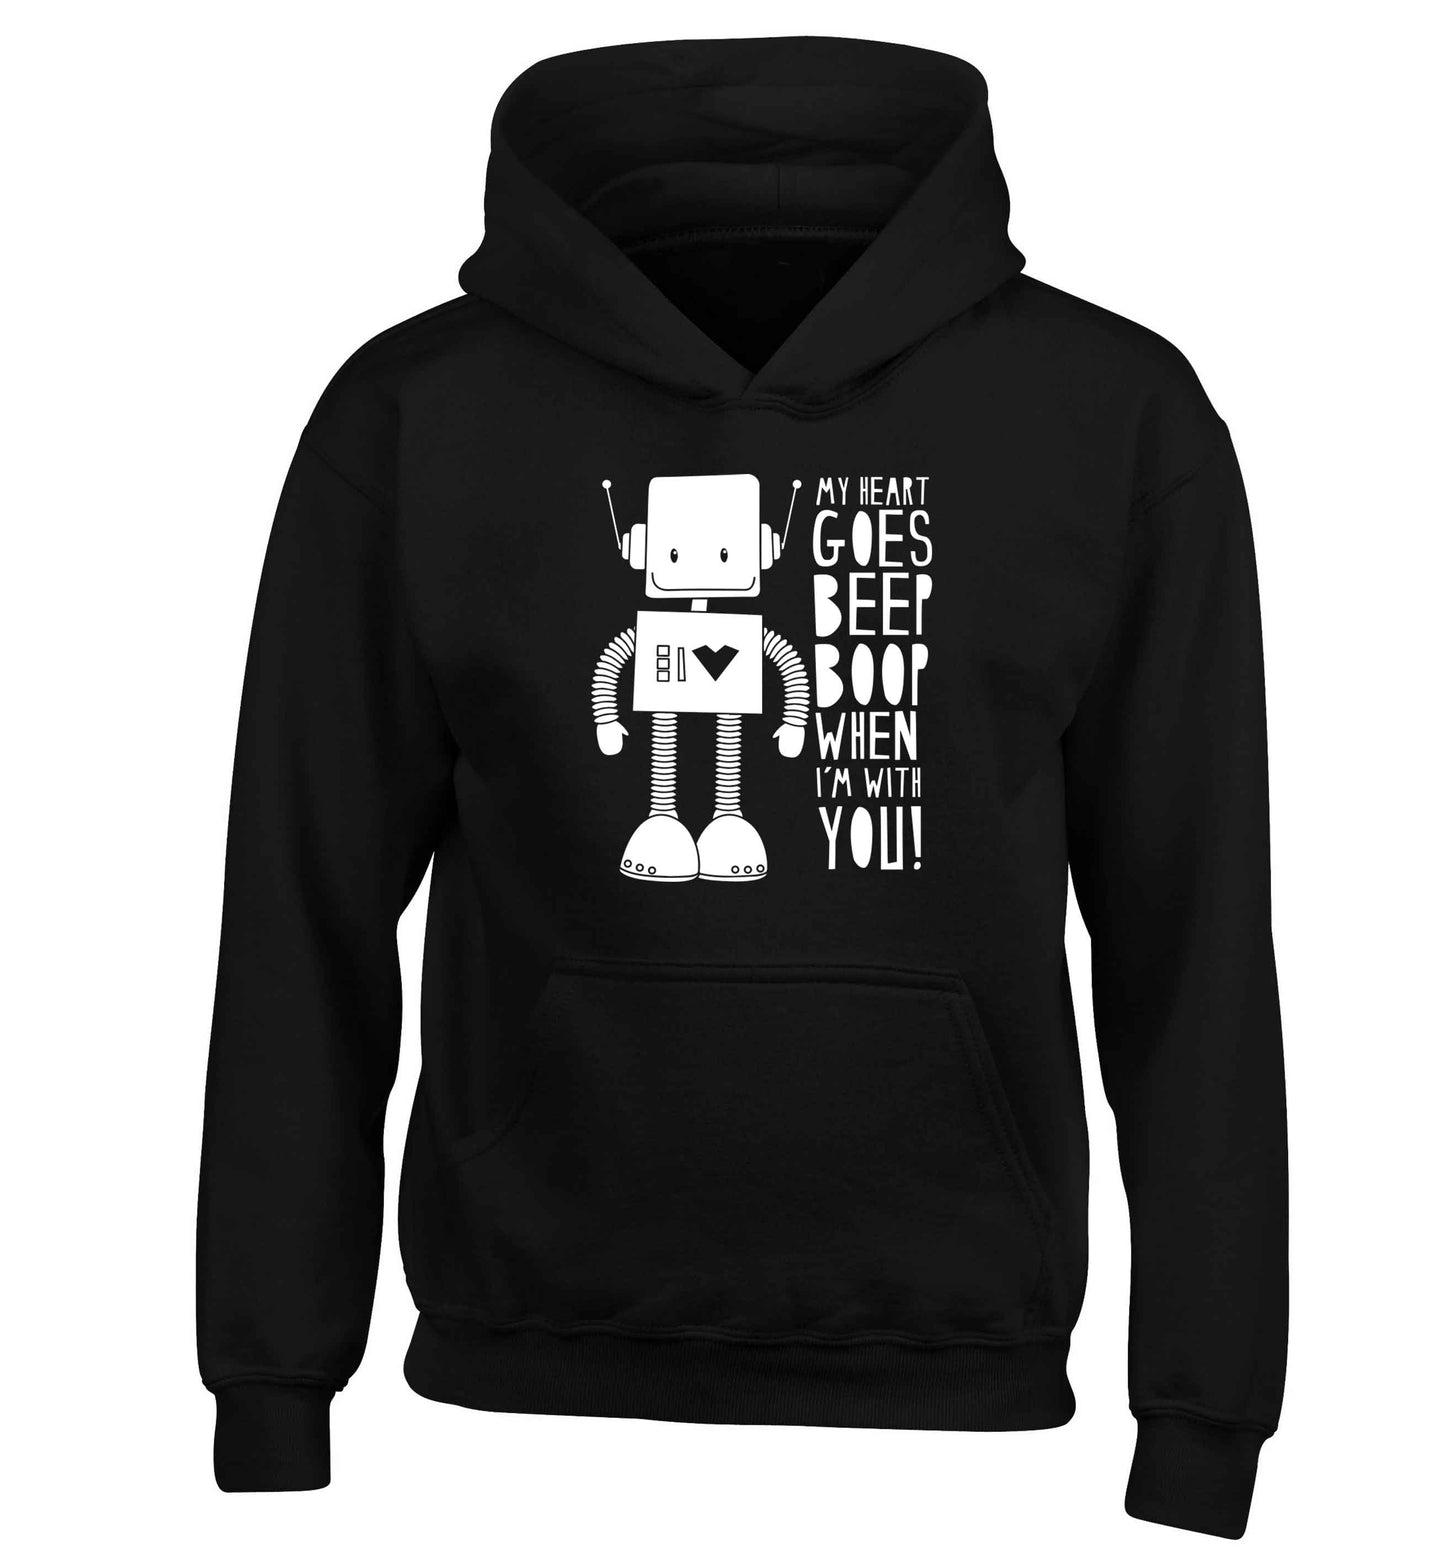 My heart goes beep boop when I'm with you children's black hoodie 12-13 Years